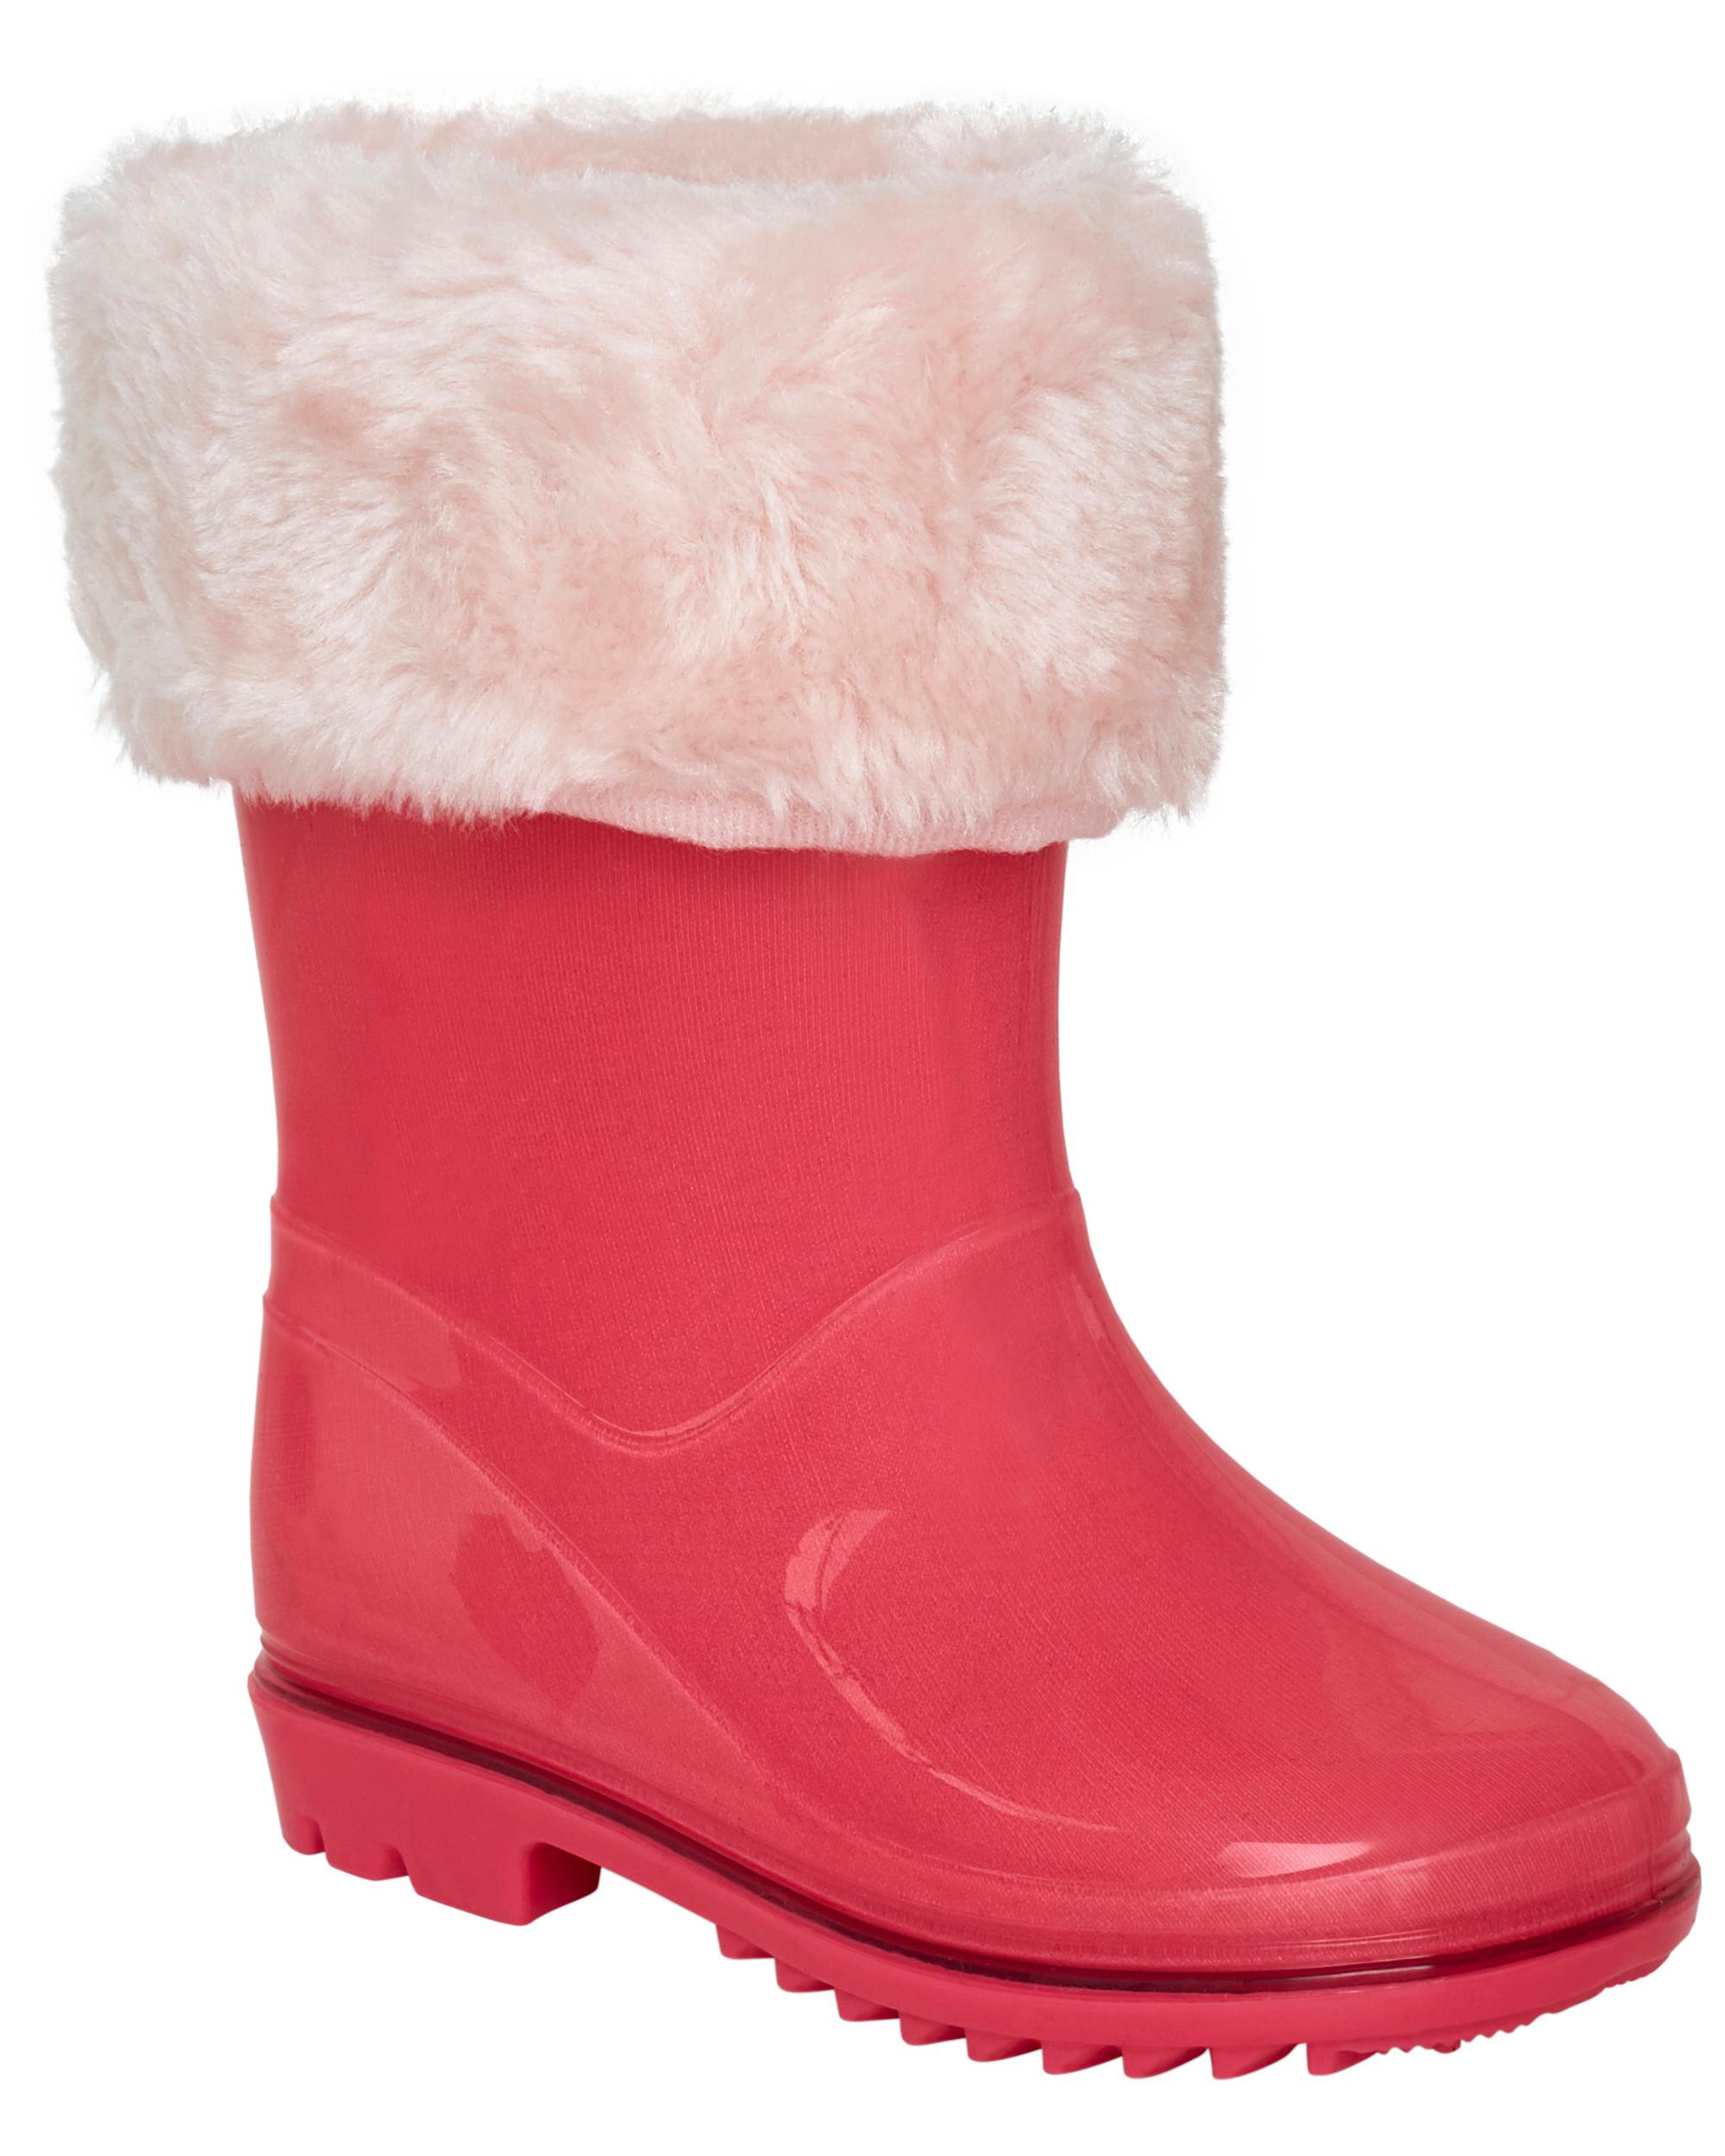 Toddler Faux Fur-Lined Boots